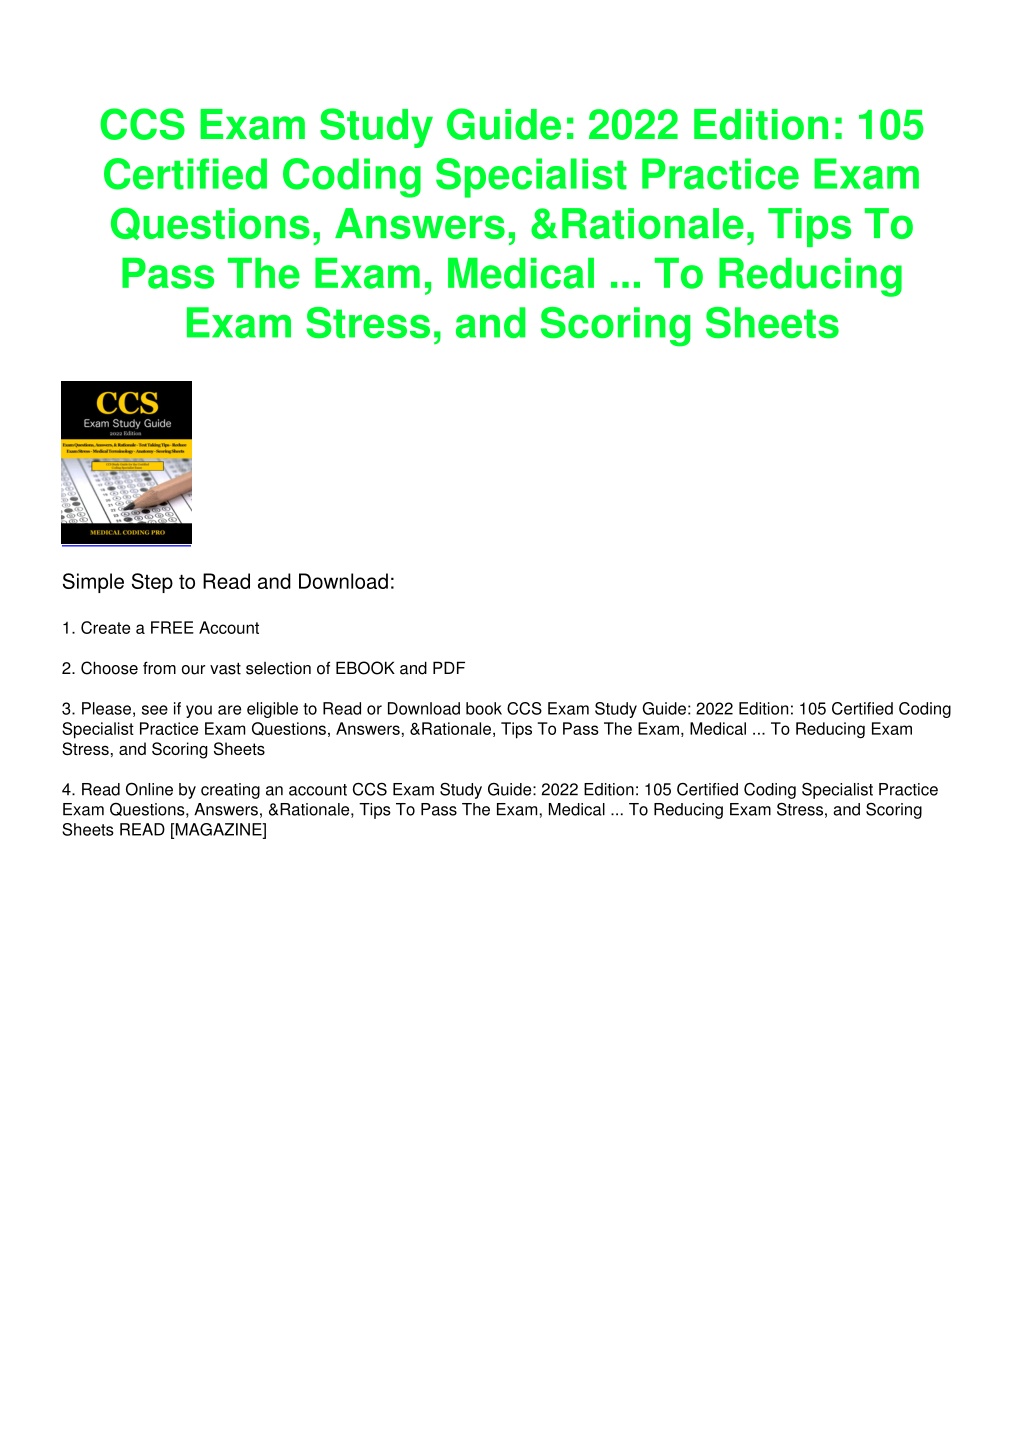 PPT (PDF/DOWNLOAD) CCS Exam Study Guide 2022 Edition 105 Certified